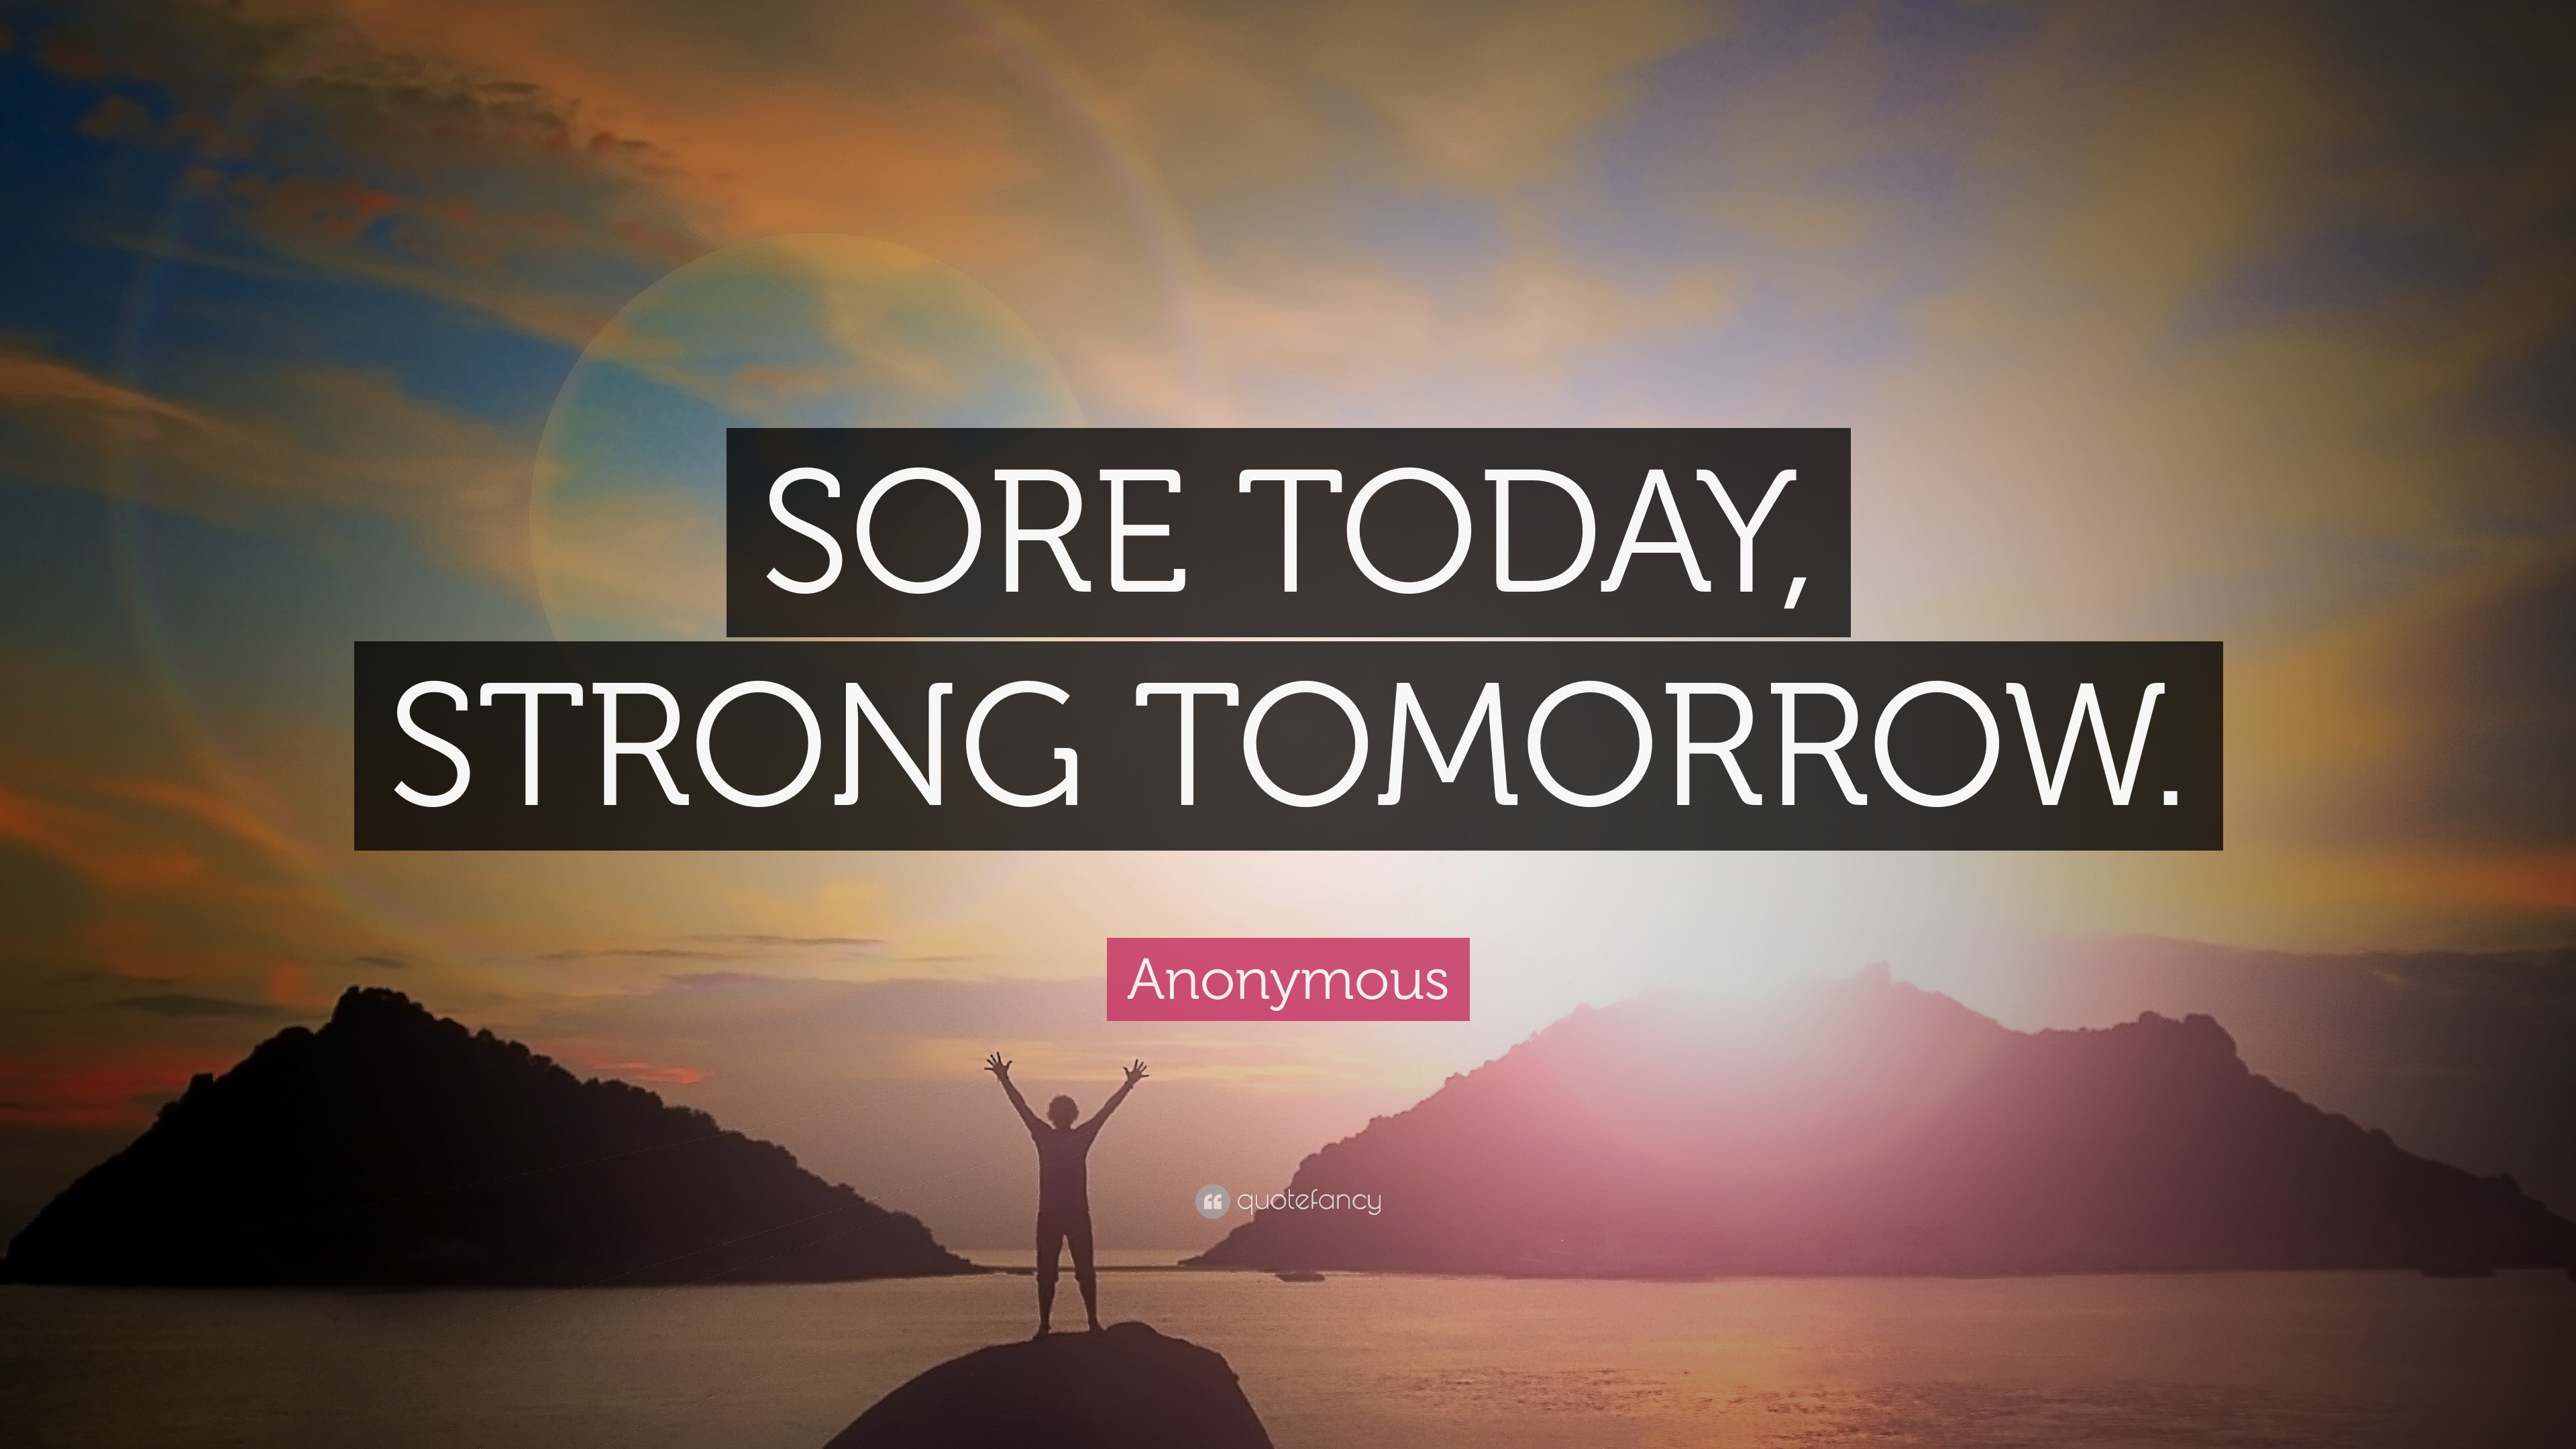 Sore today, Strong tomorrow……and maybe a little whiny in between